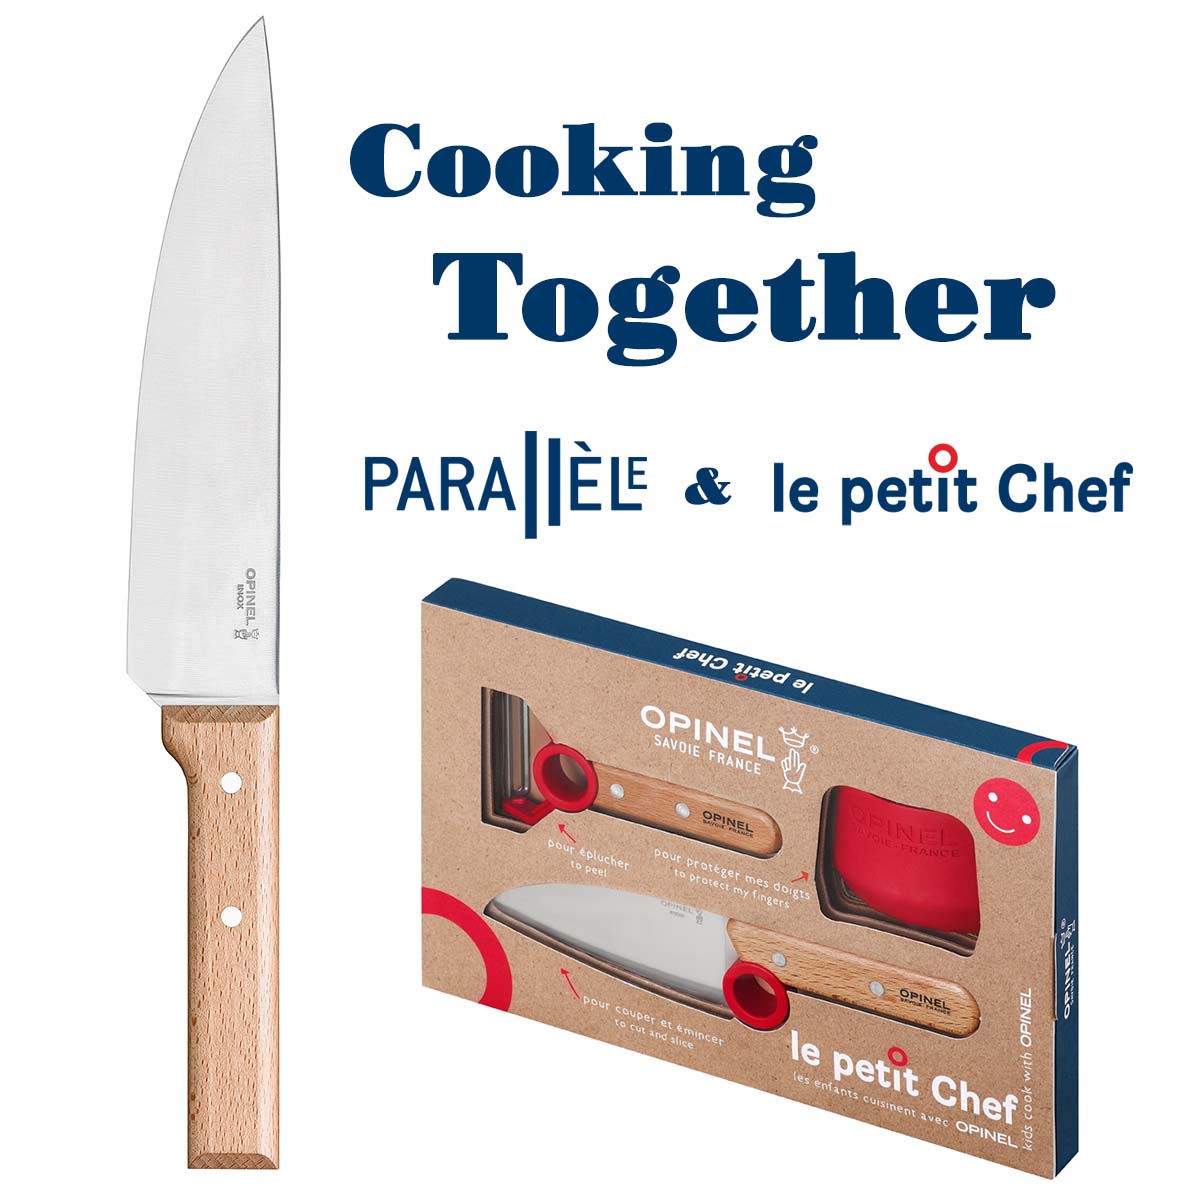 Cooking Together Kit - Le Petit Chef x Your choice of Chef Knife